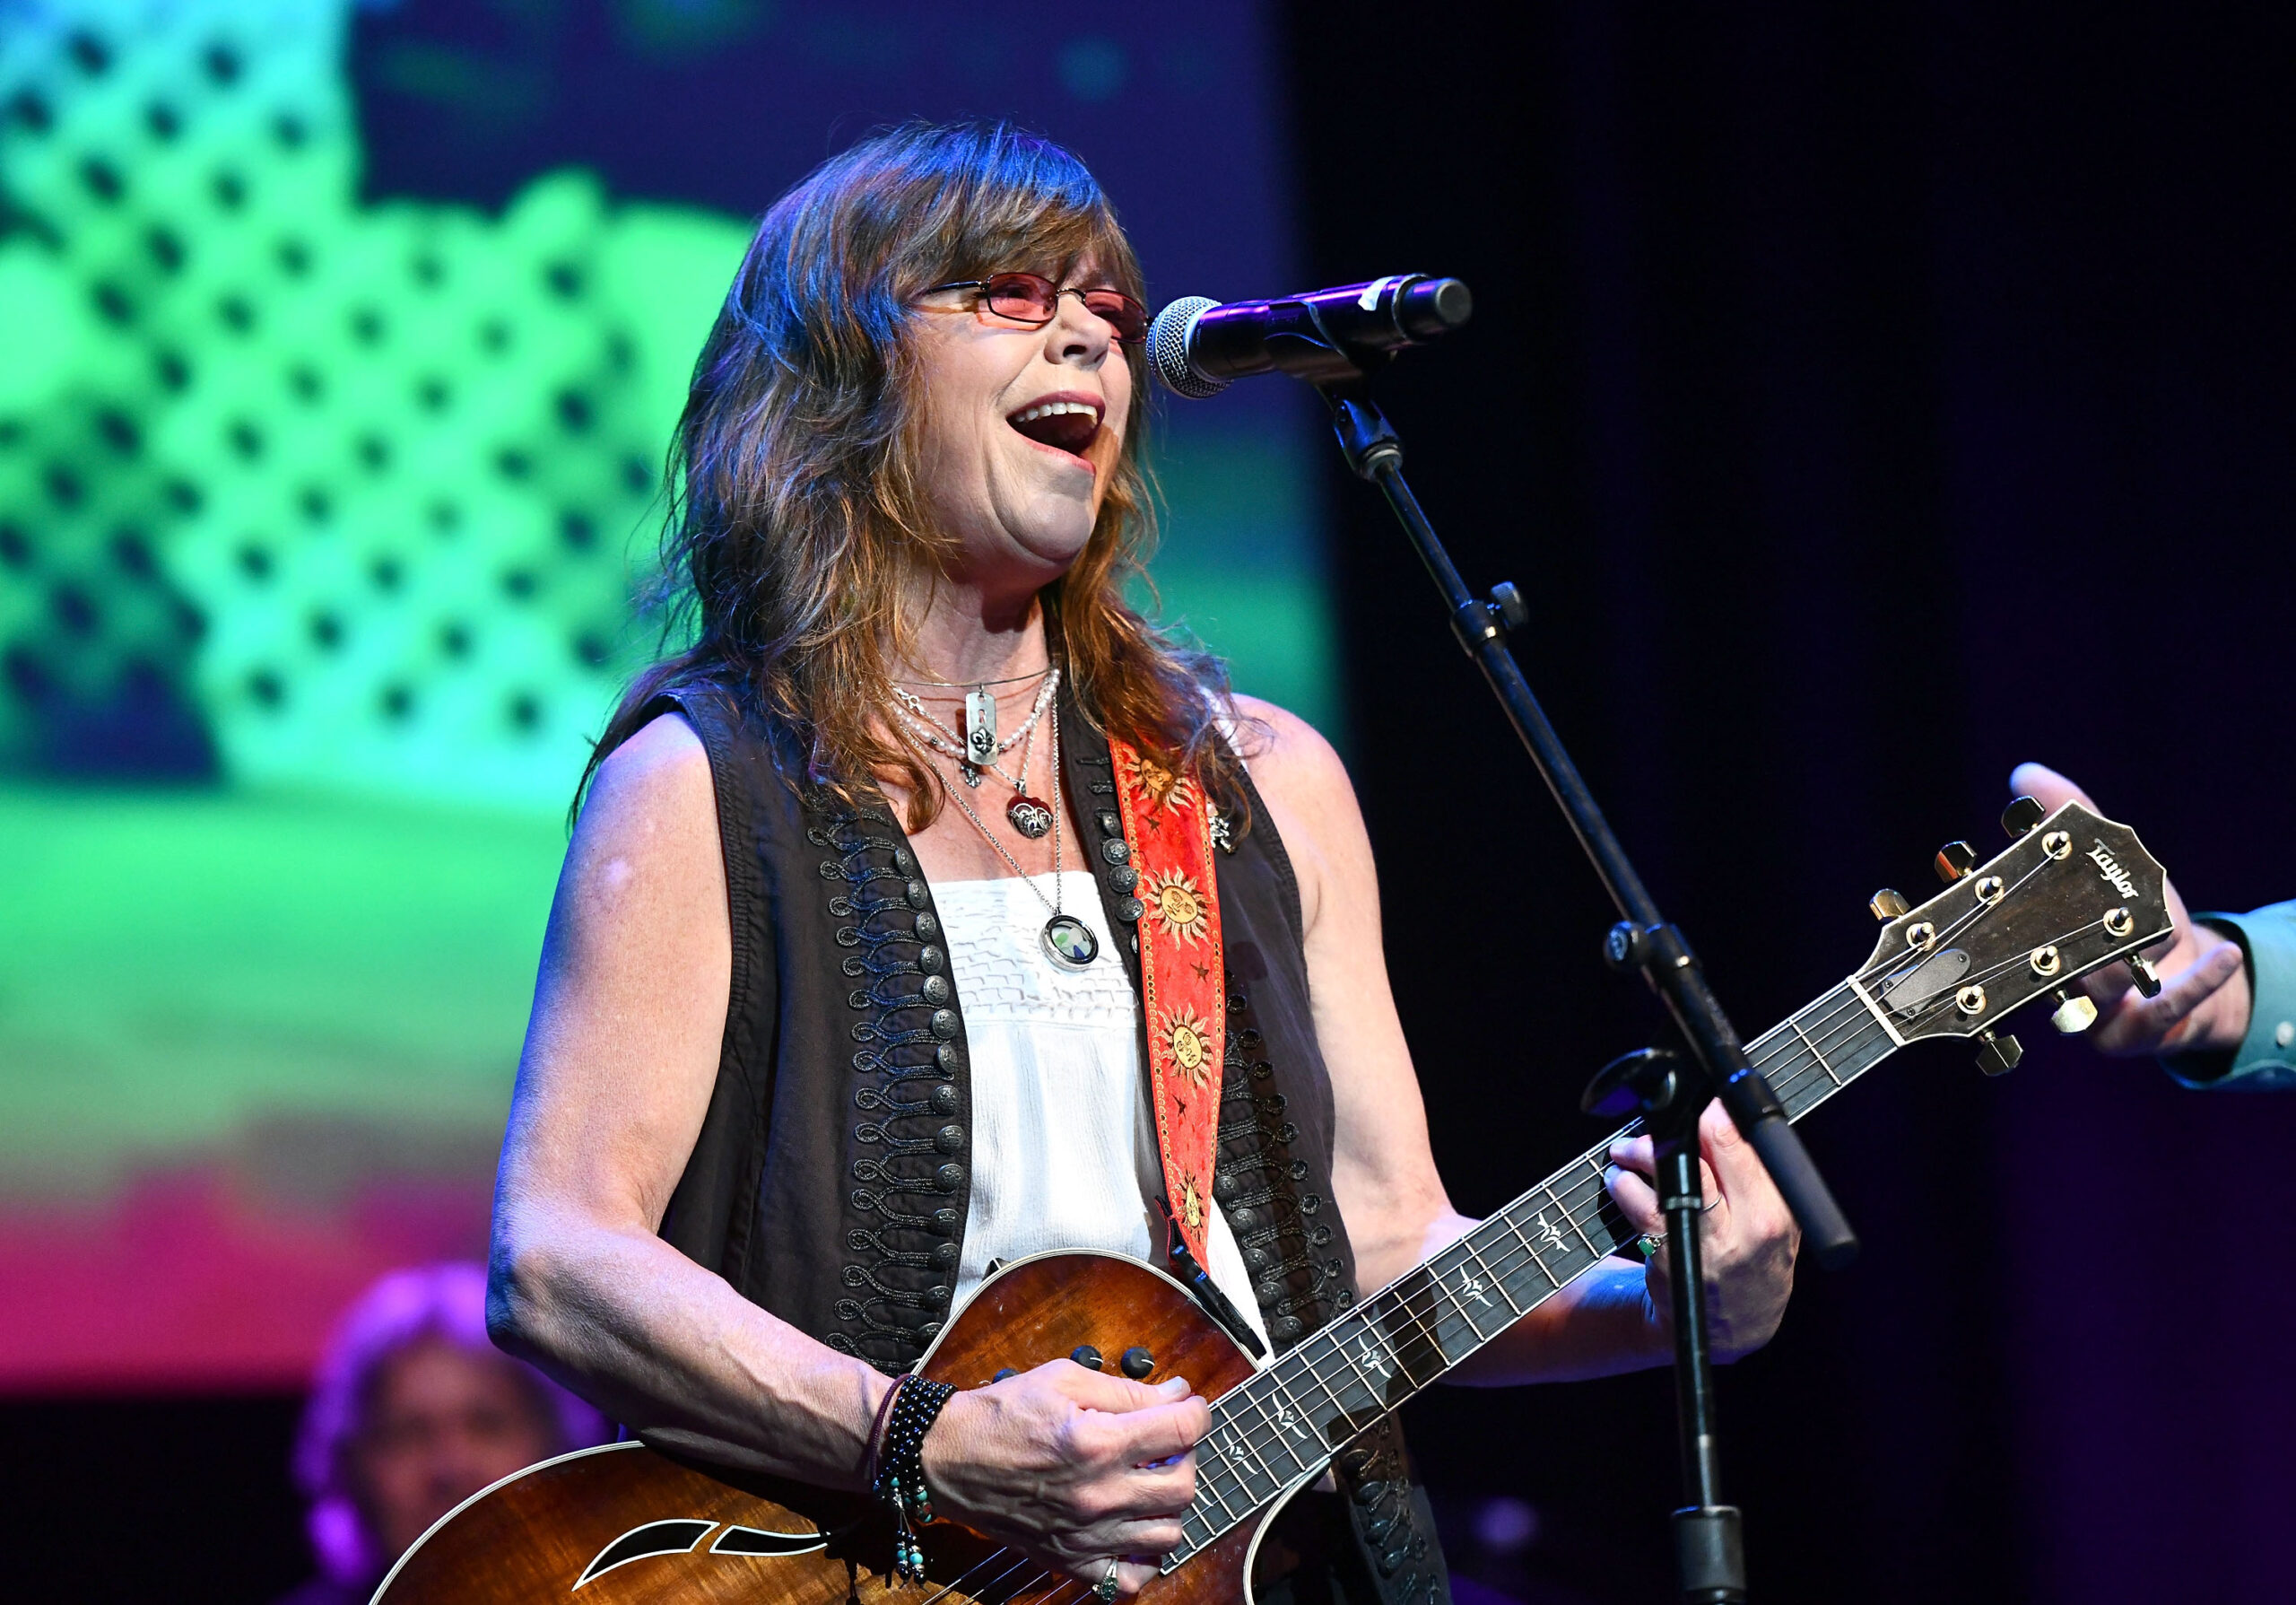 Susan Cowsill performs during the Happy Together tour at Saban Theatre in 2018.  (Credit: Scott Dudelson/Getty Images)